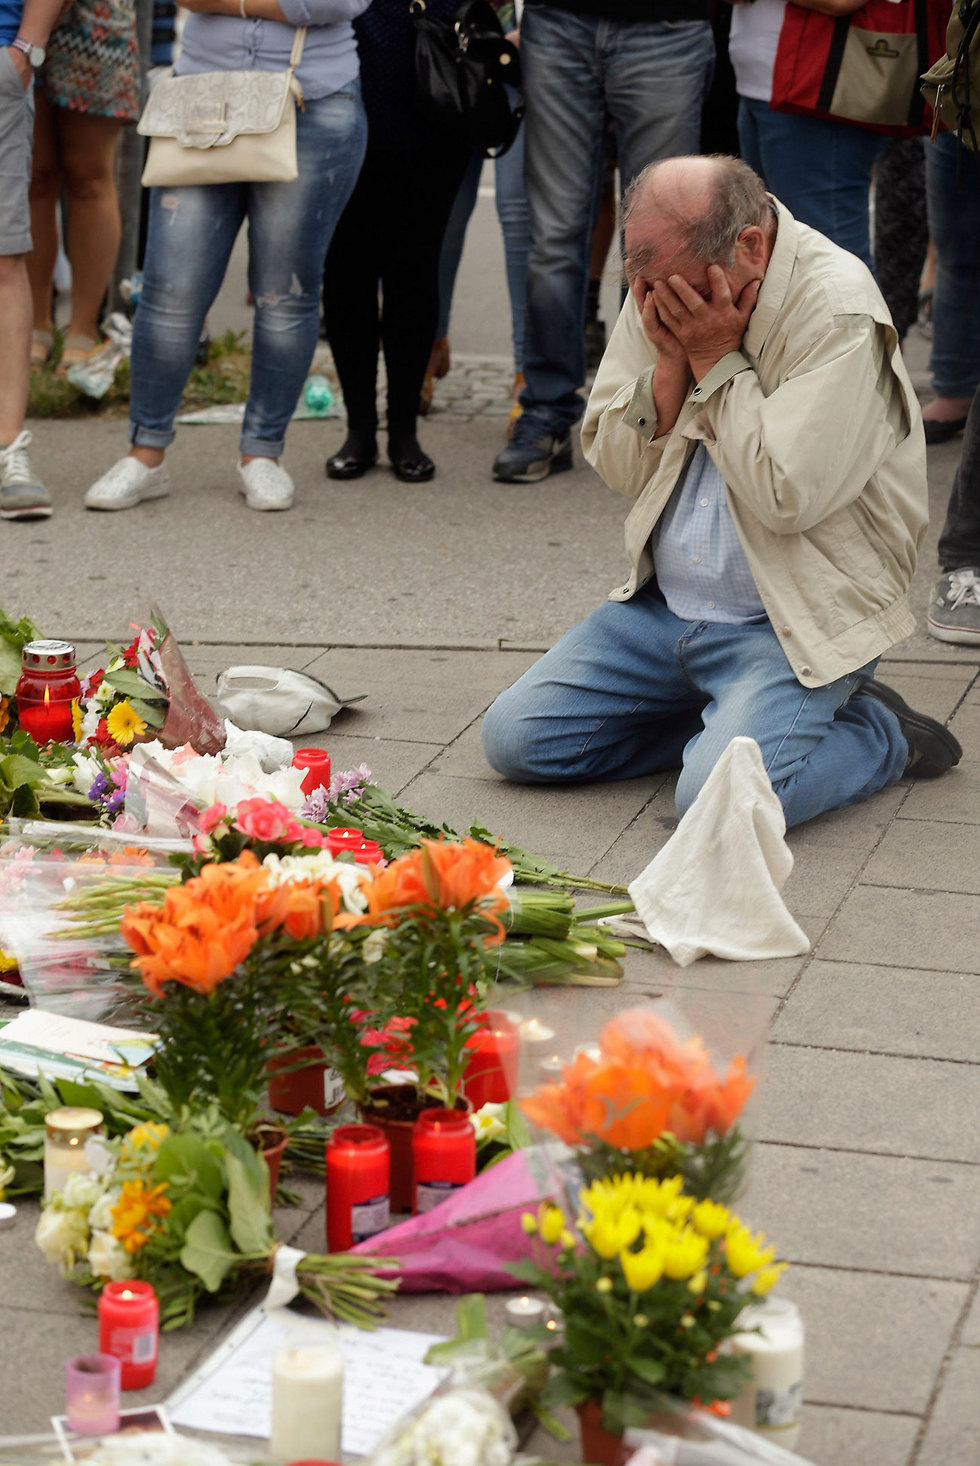 Scene of the attack in Munich (Photo: Getty Images)